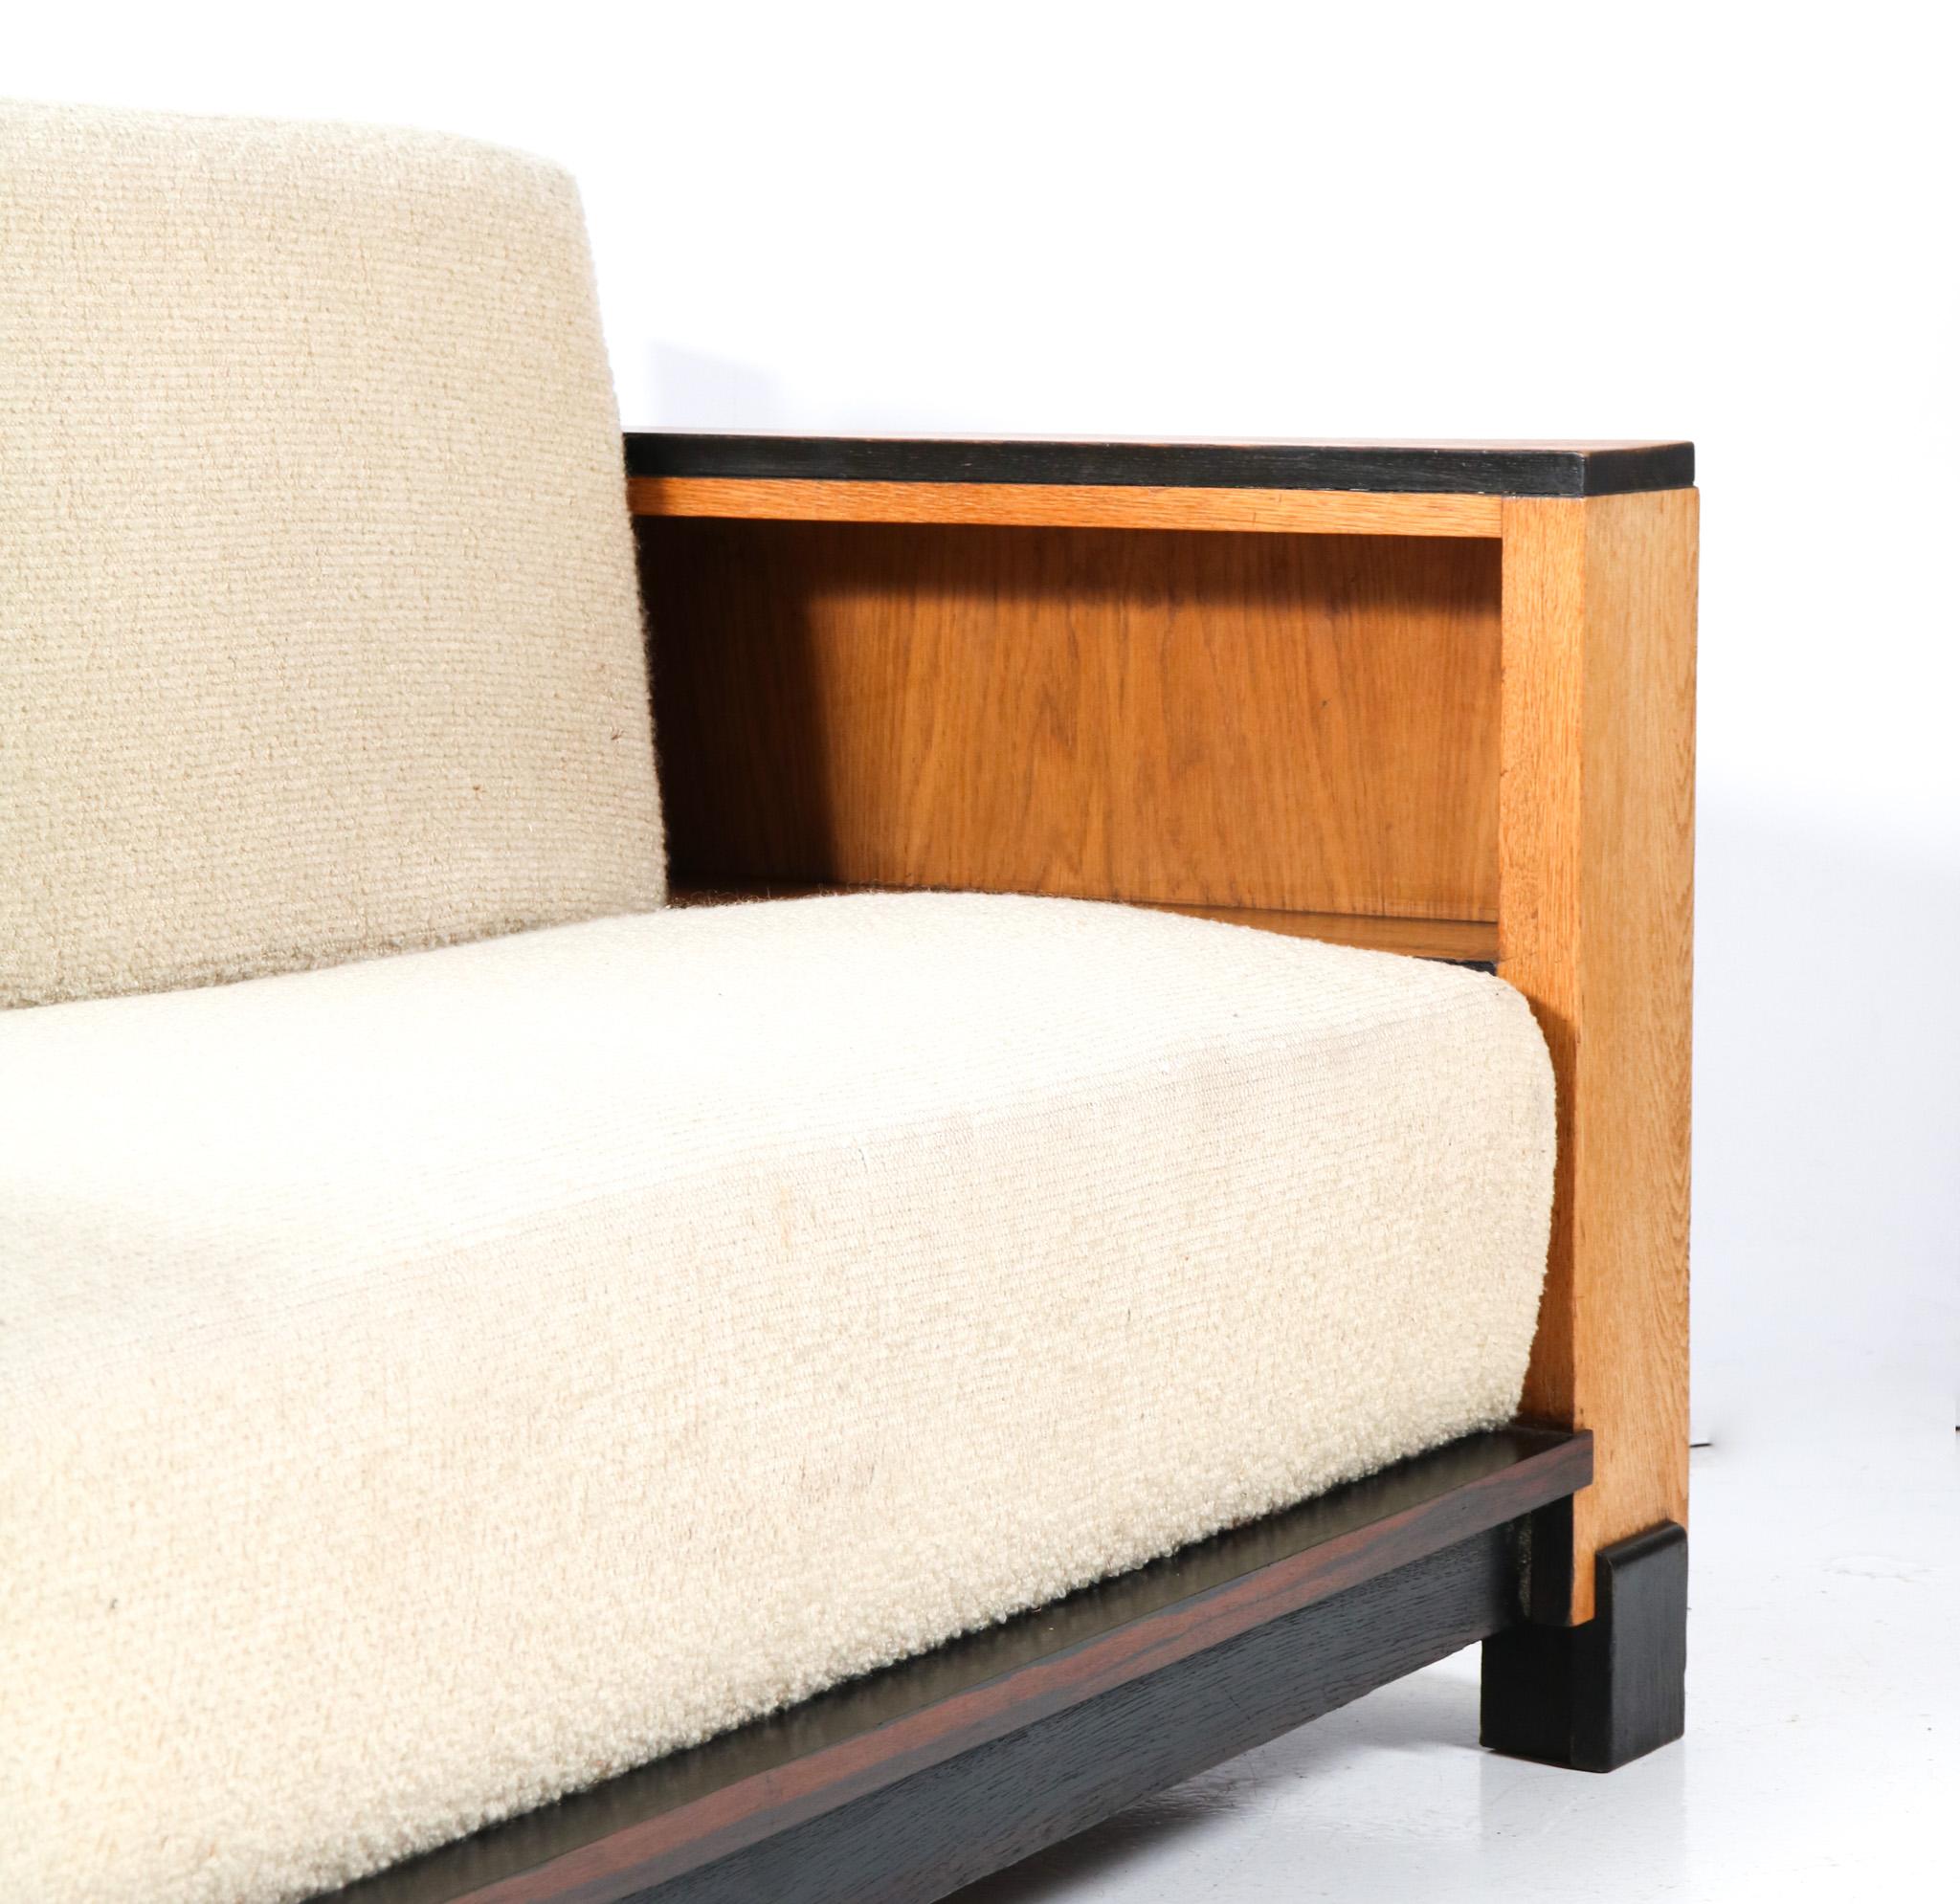 Early 20th Century Oak Art Deco Modernist Bench or Sofa, 1920s For Sale